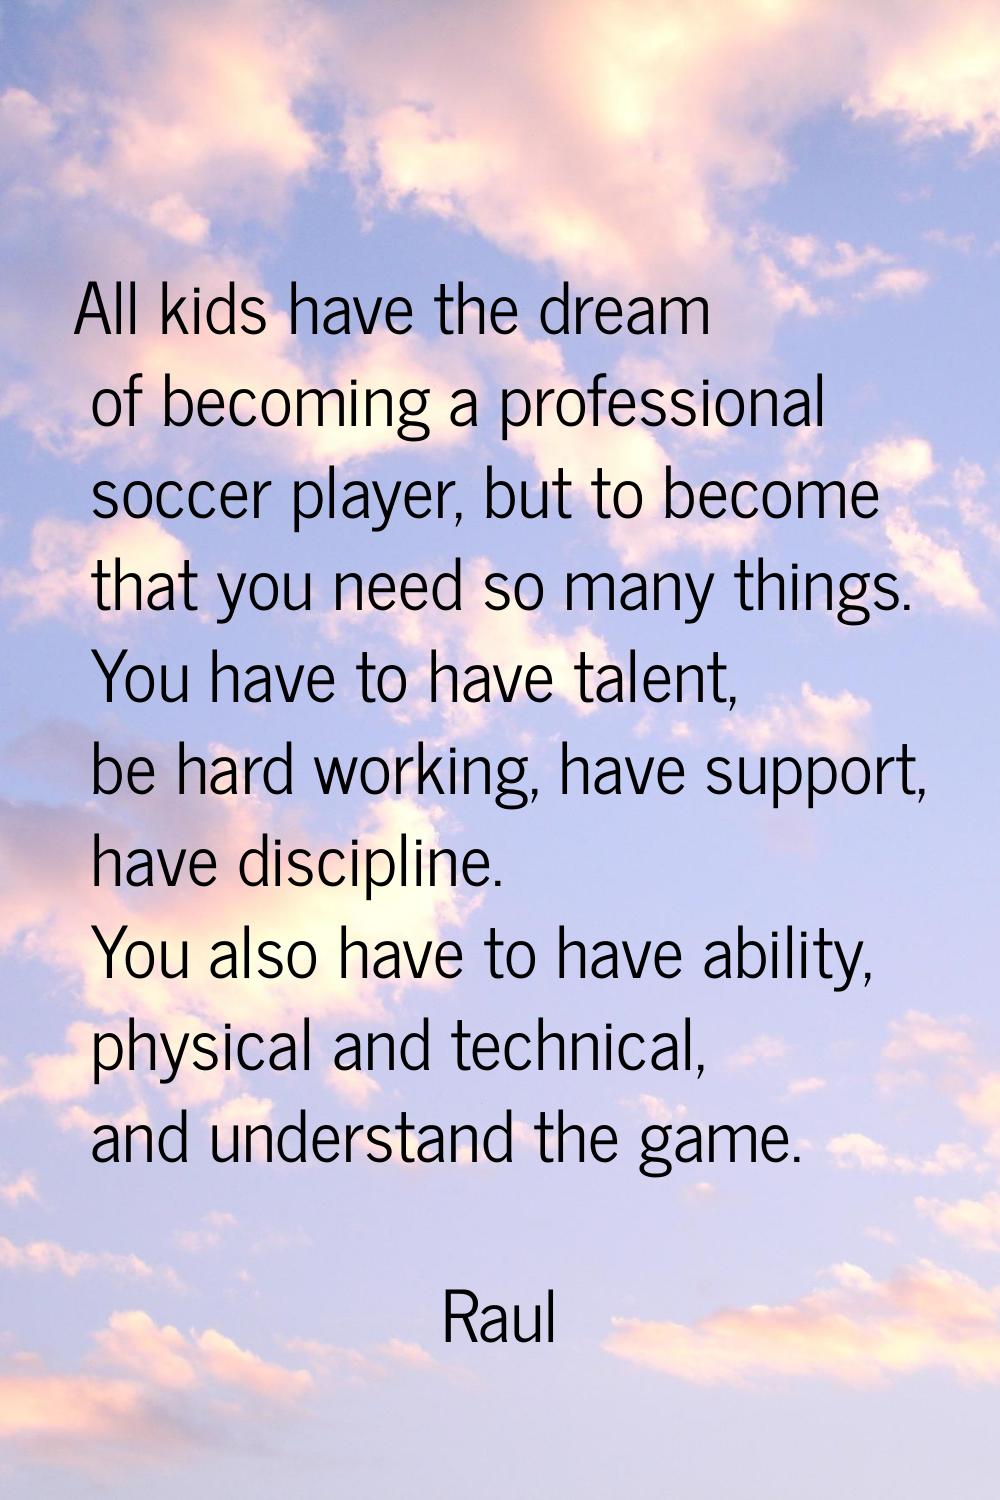 All kids have the dream of becoming a professional soccer player, but to become that you need so ma